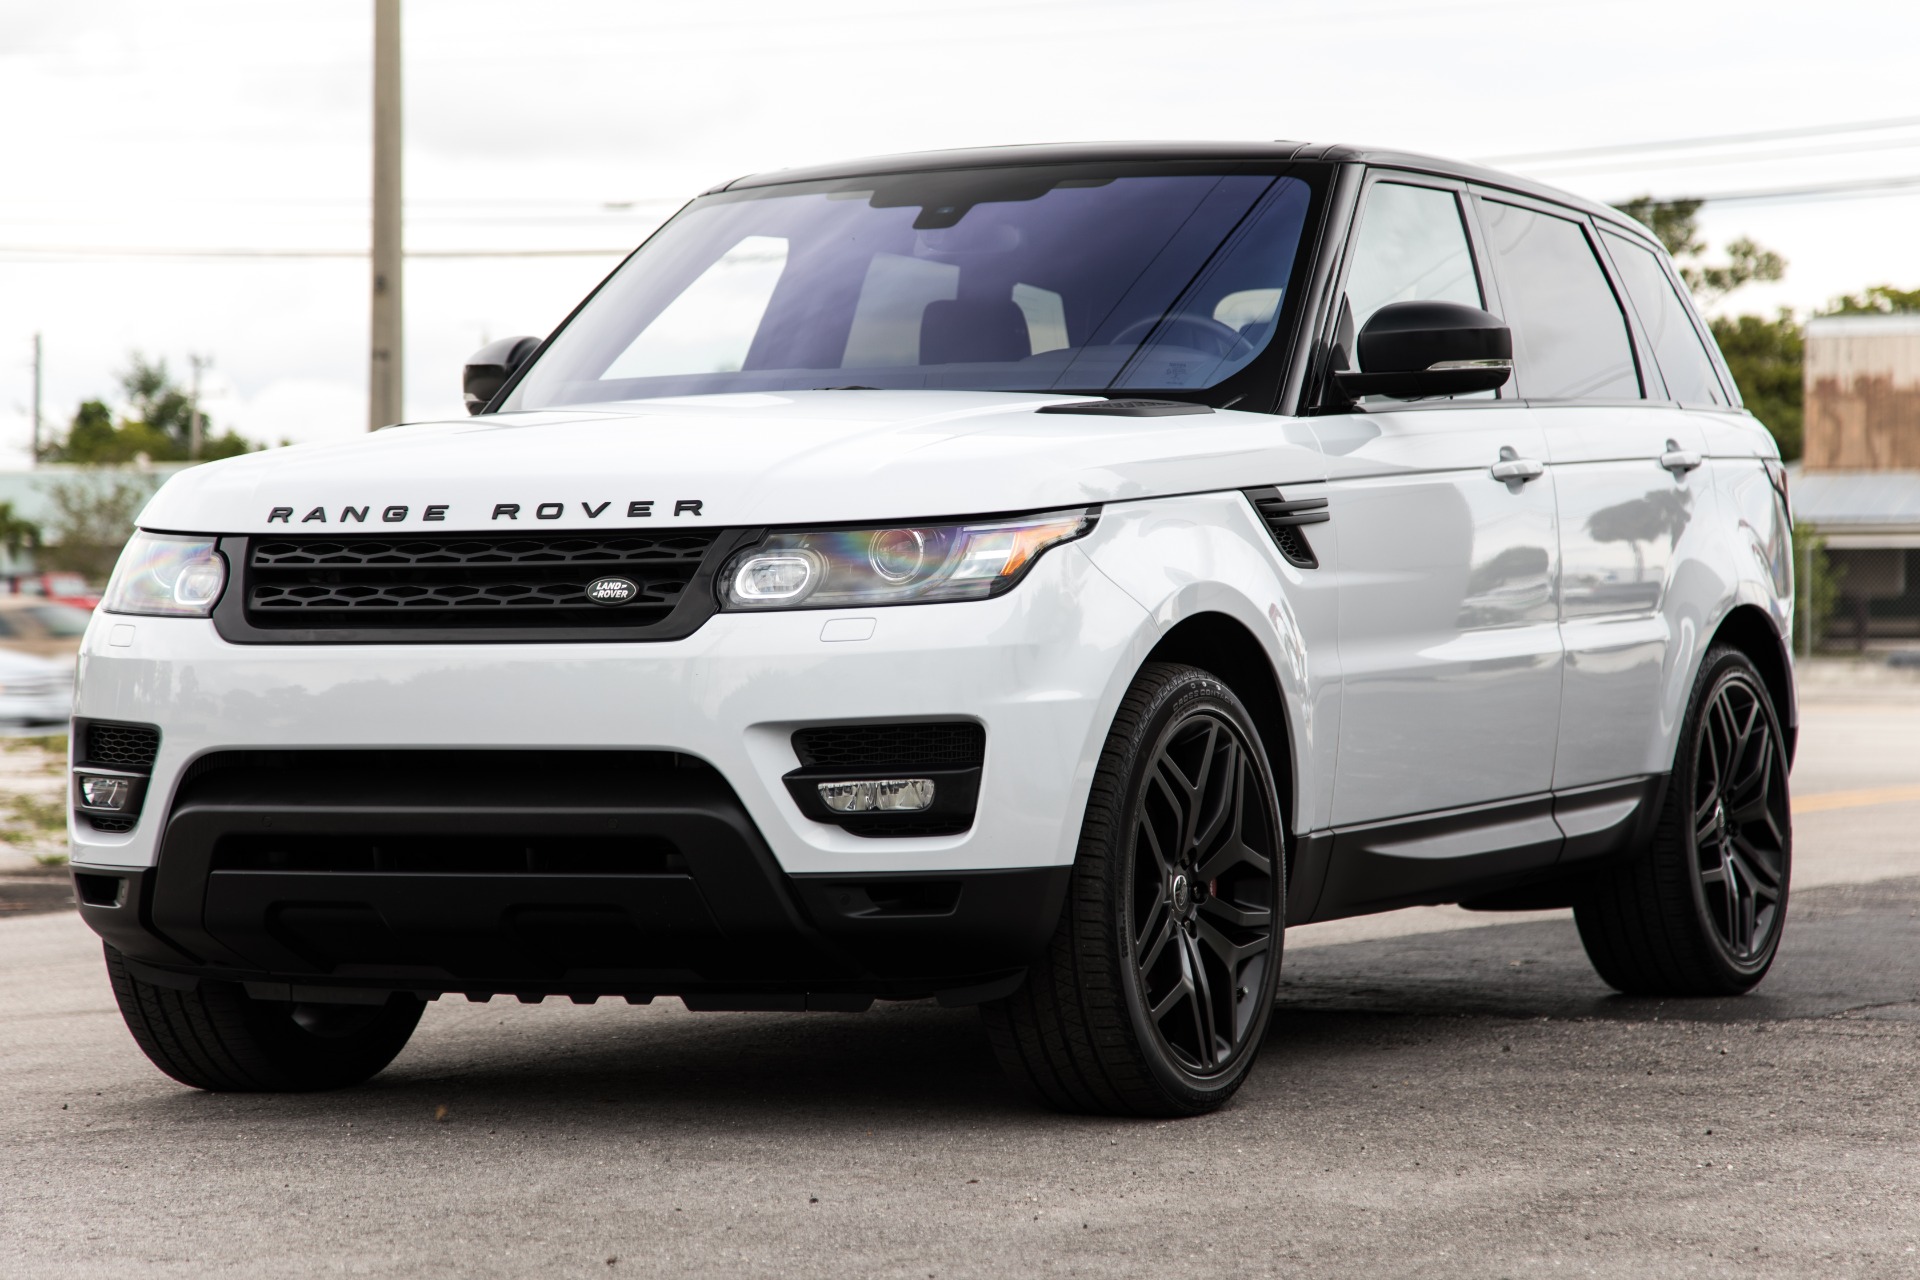 2016 Supercharged Range Rover Sport - www.inf-inet.com